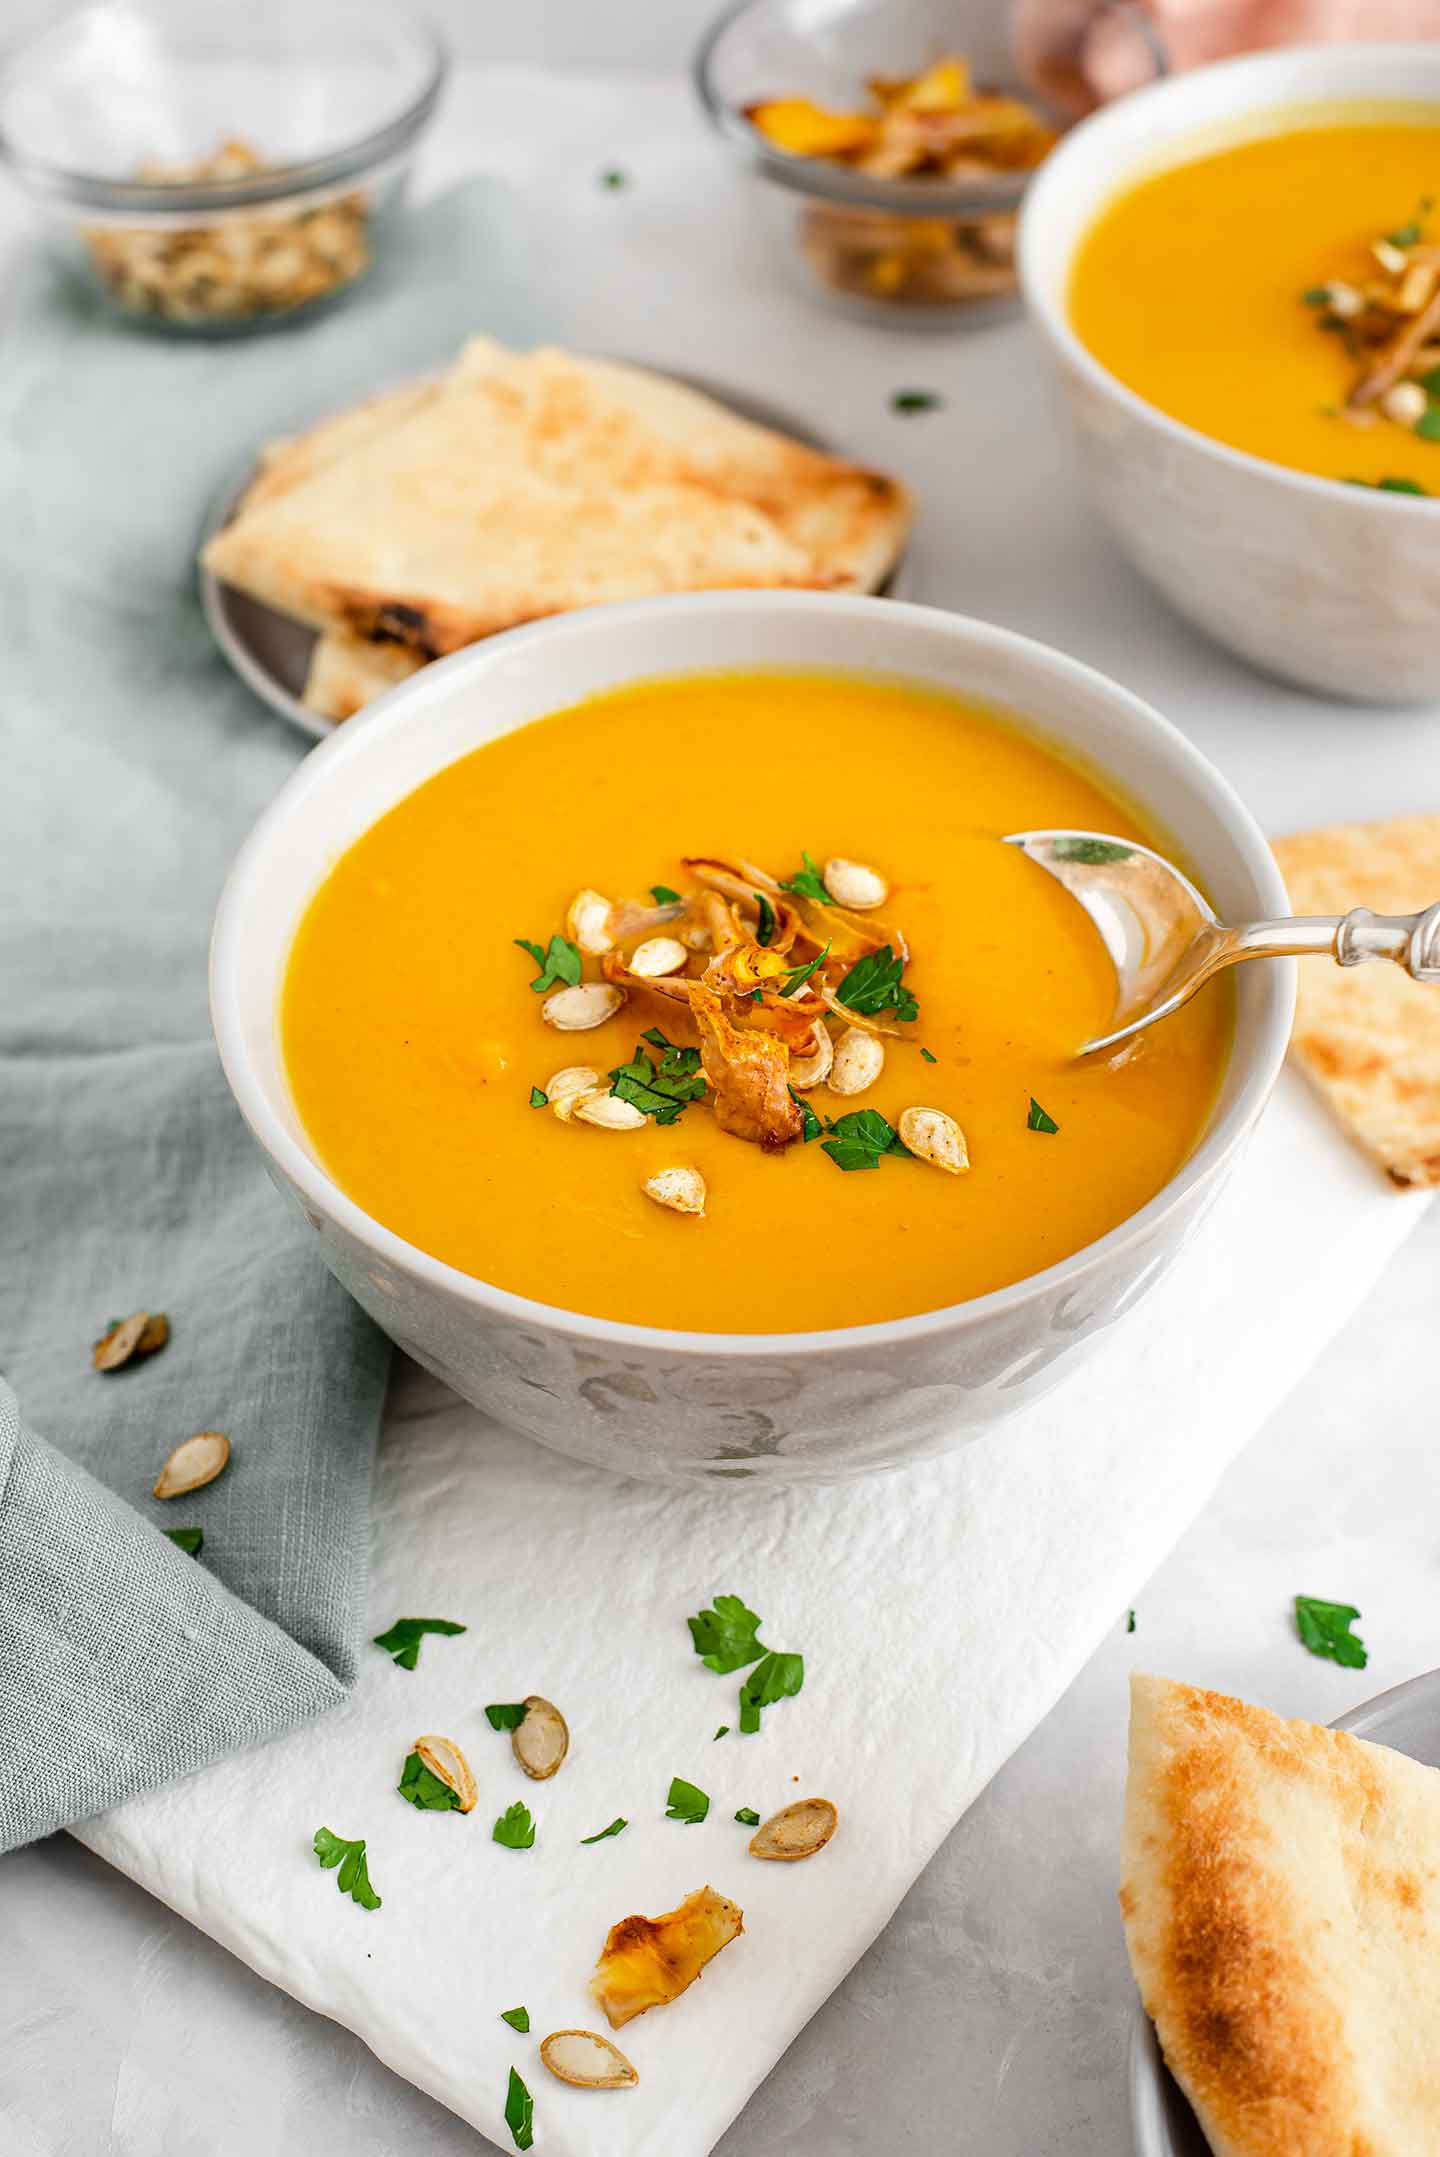 Side view of a spoon scooping curried butternut squash soup. The soup is a vibrant yellow/orange colour and topped with roasted squash seeds, squash skin chips, and fresh parsley. Naan bread is served on the side.